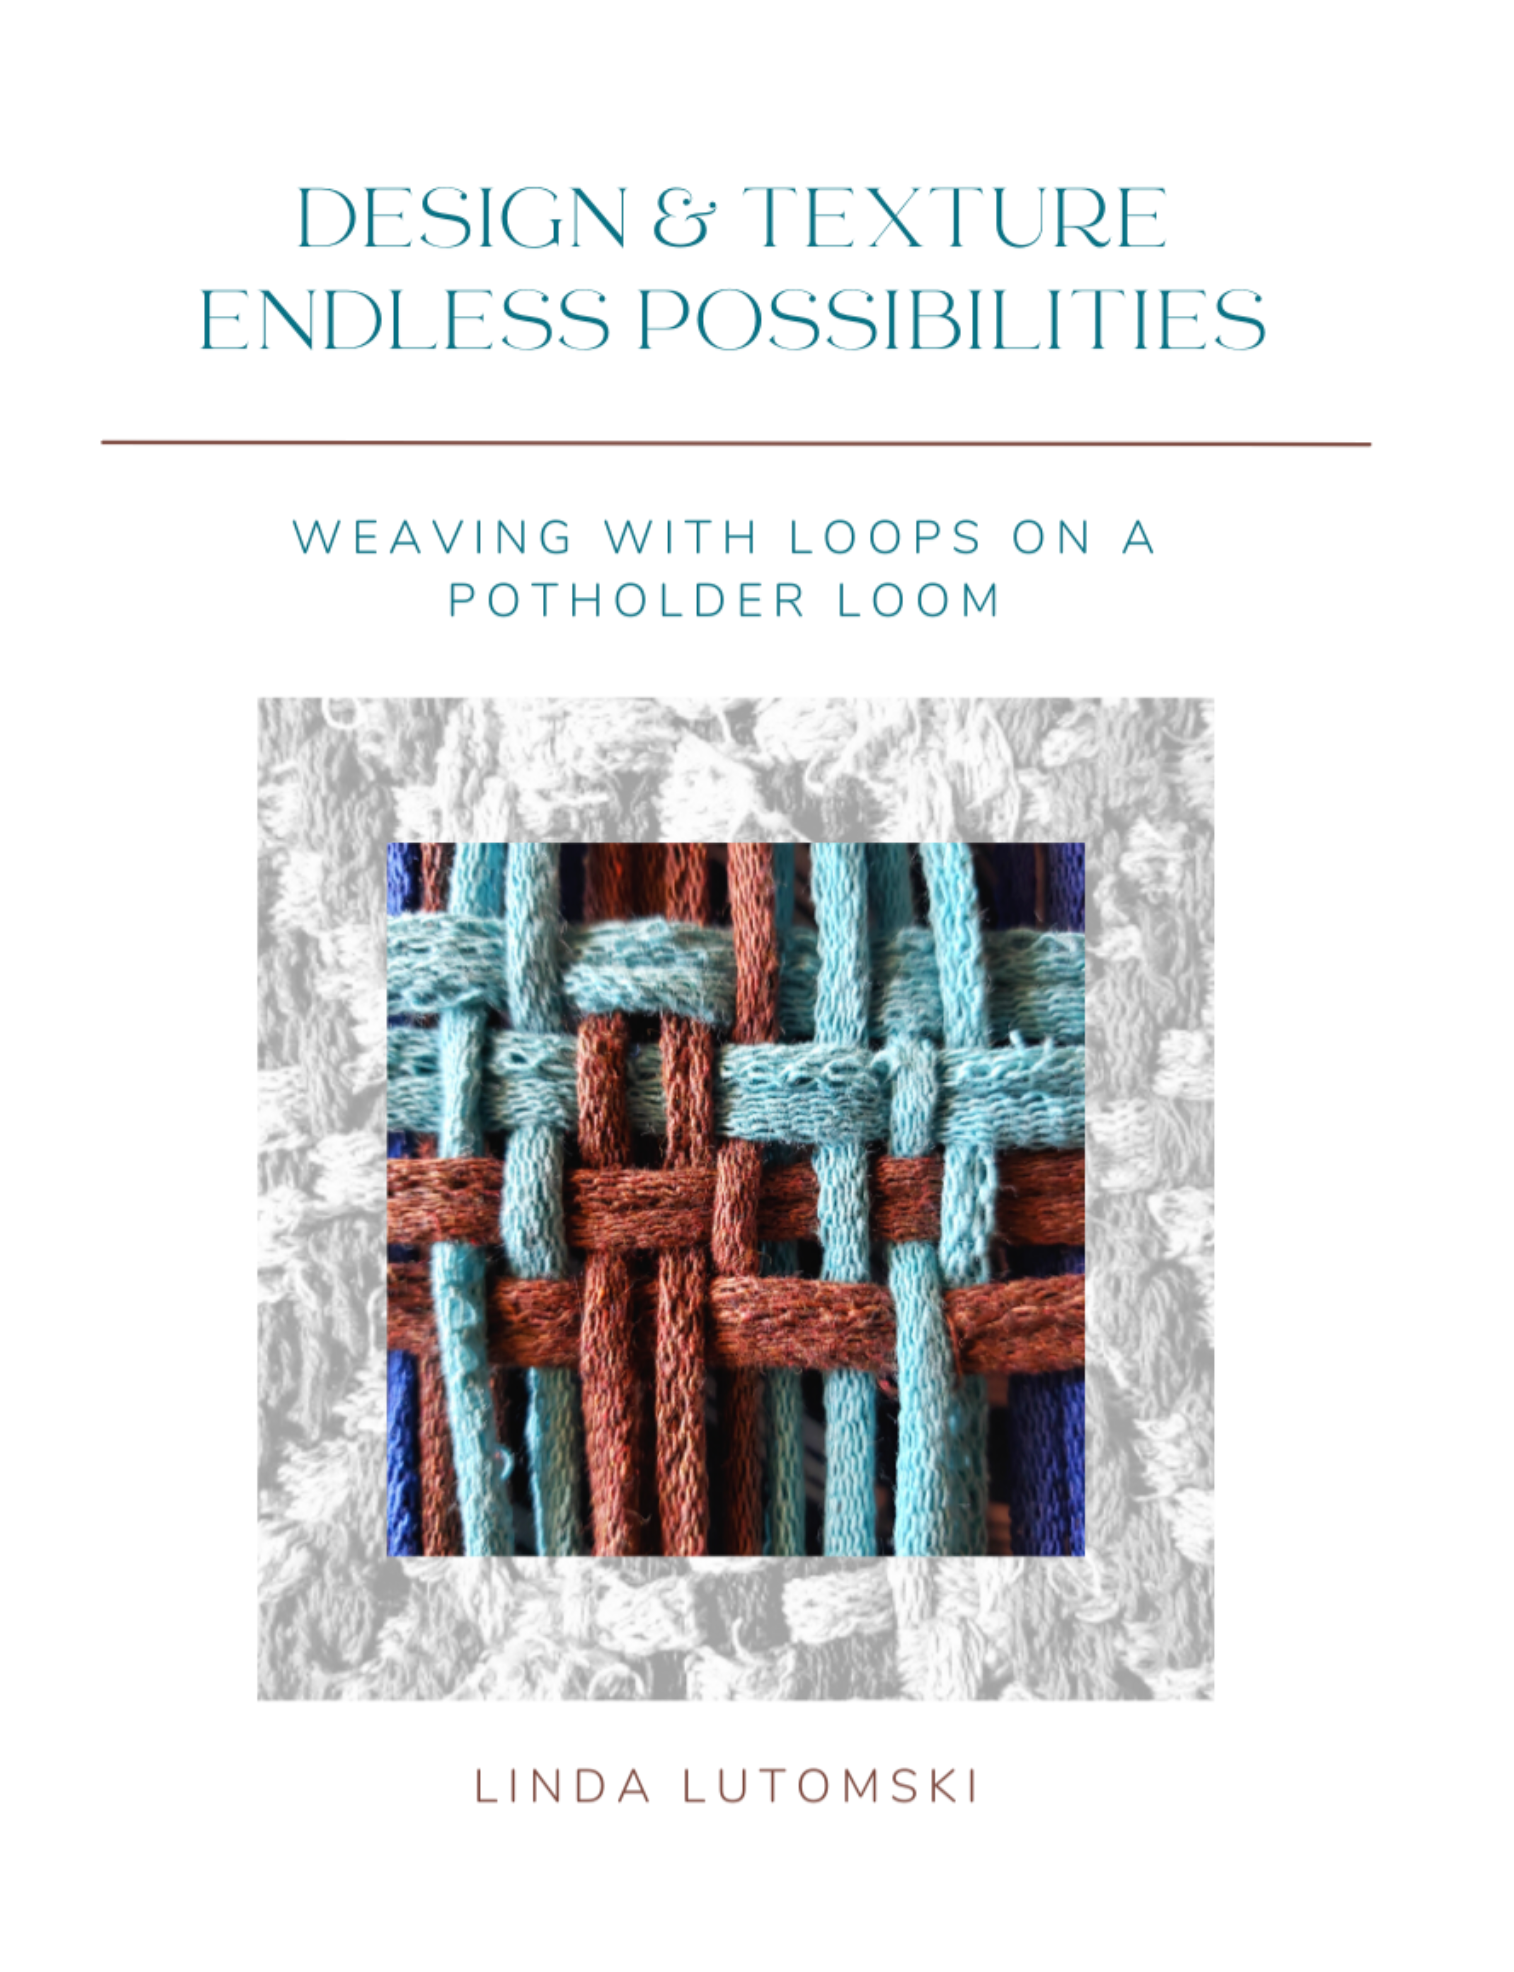 Design & Texture Endless Possibilities: Weaving With Loops on a Potholder Loom by Linda Lutomski